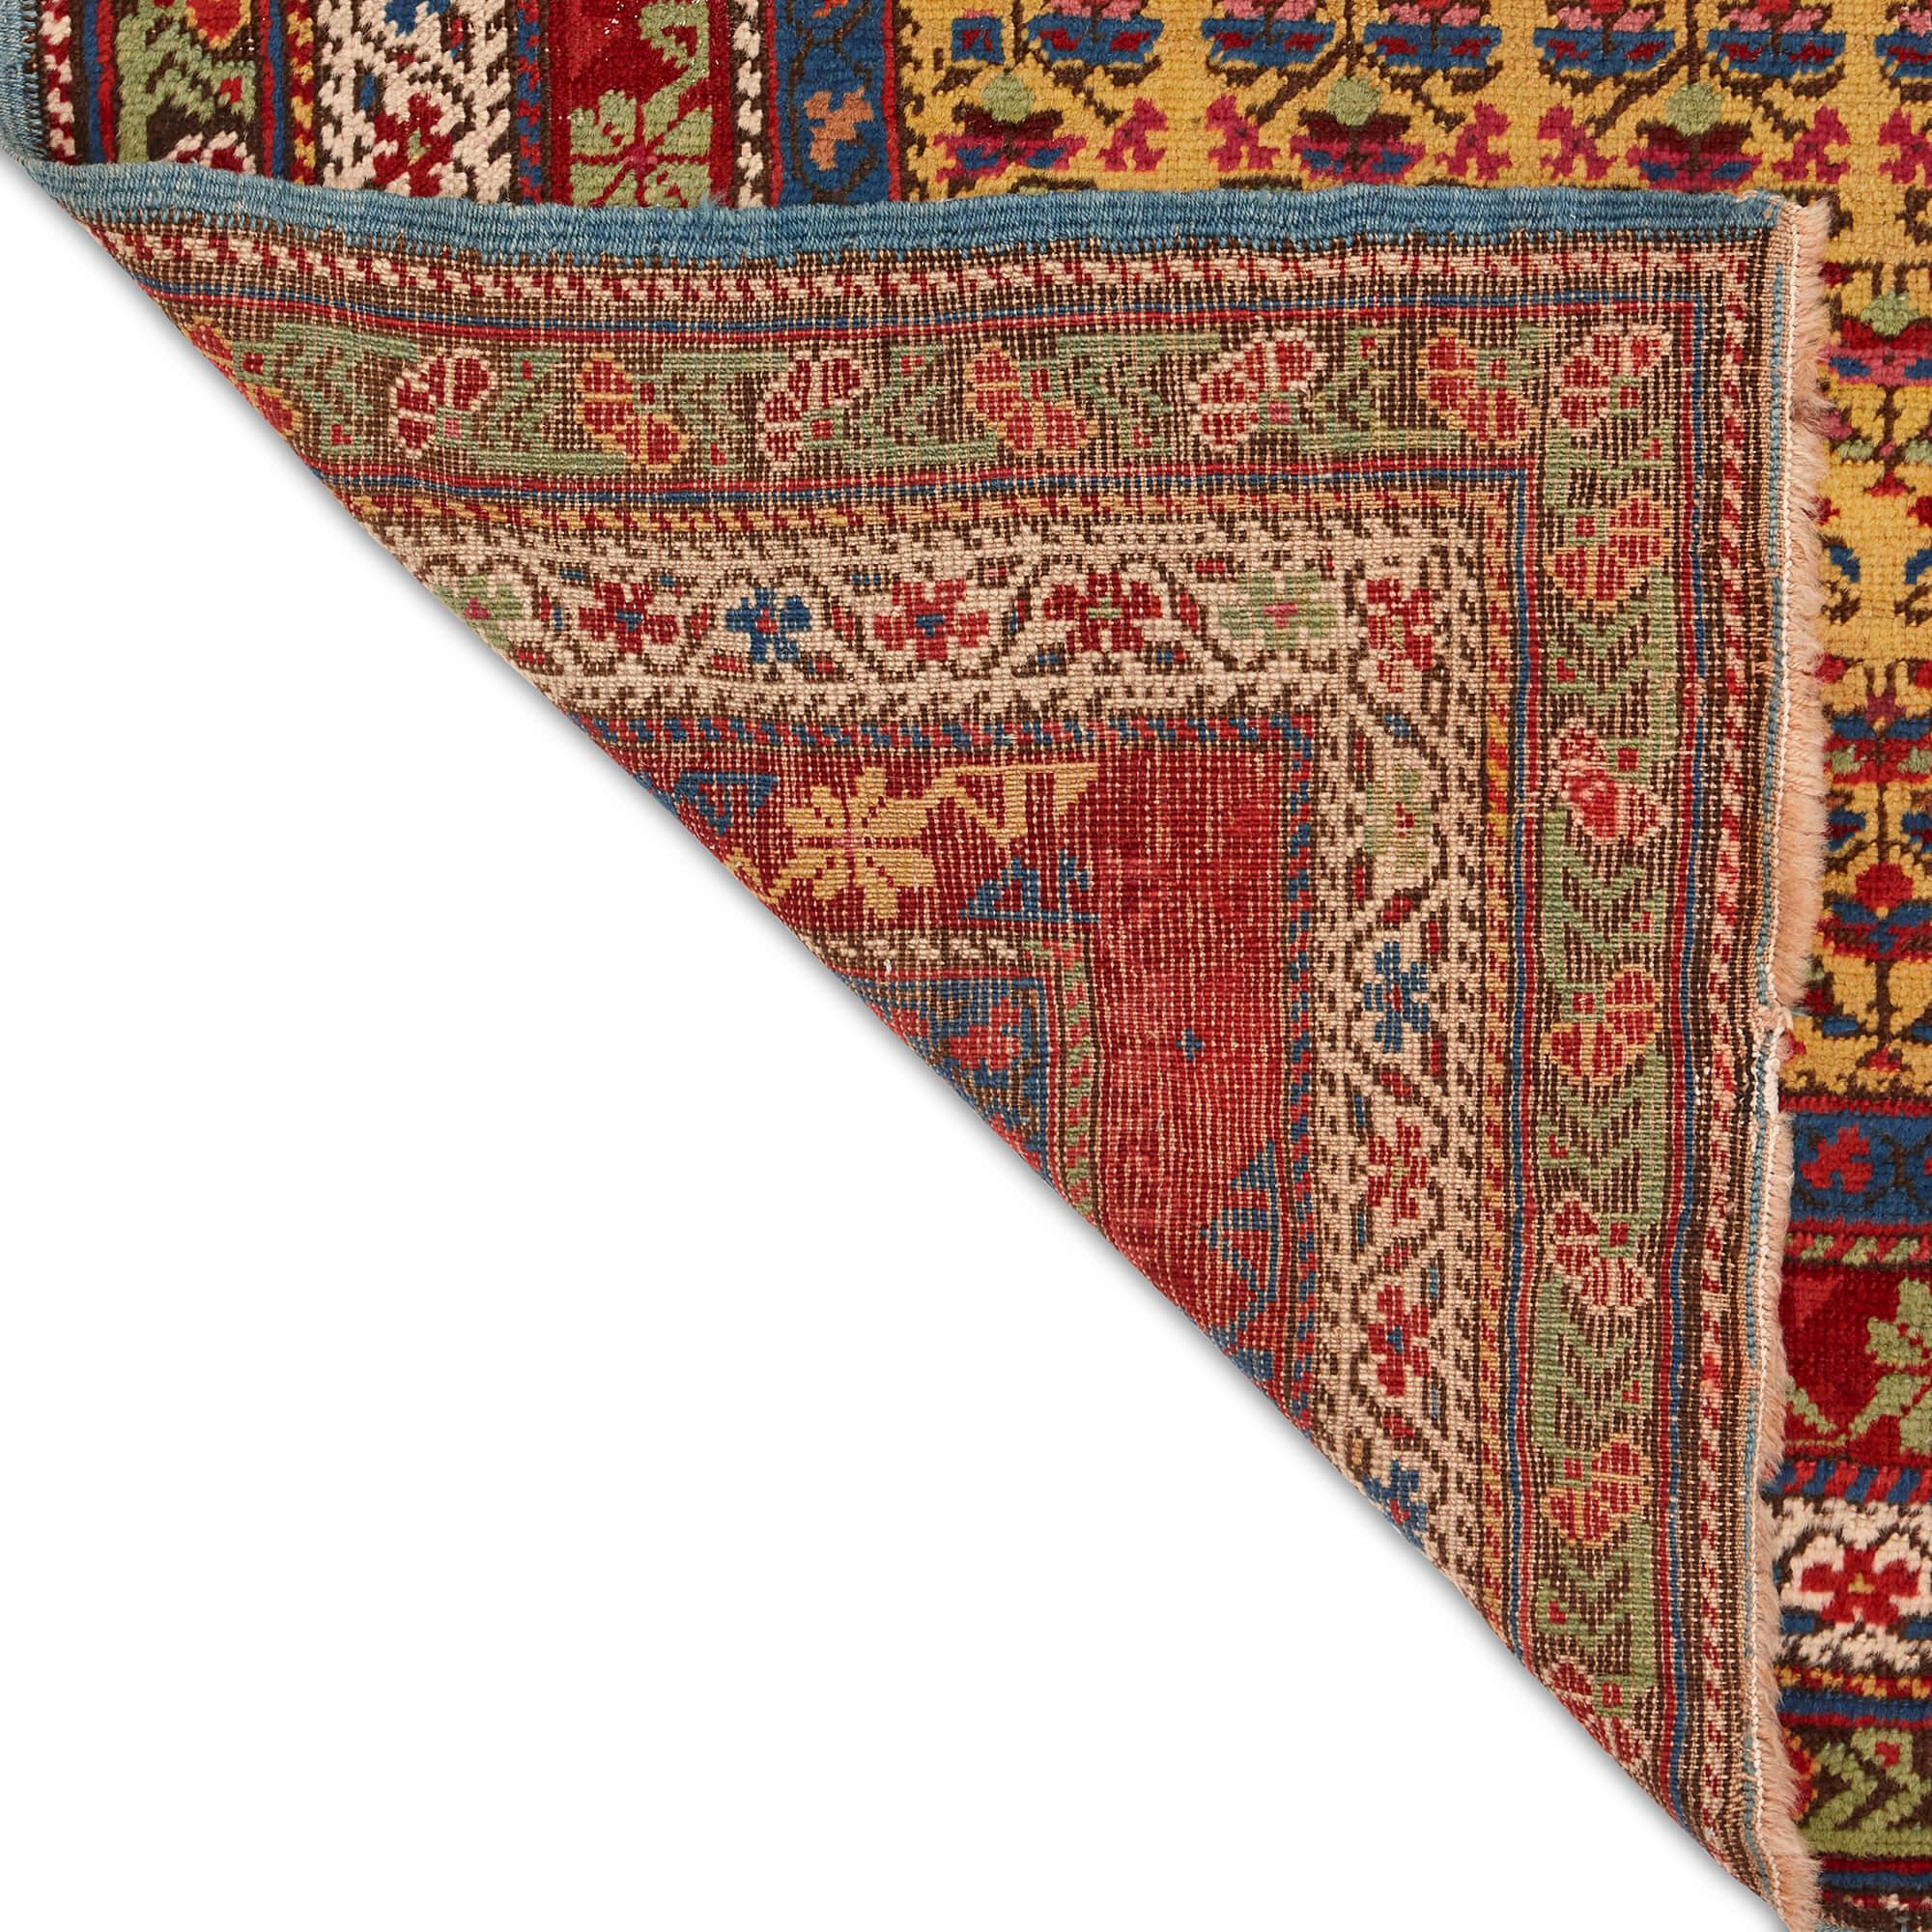 Flower motif Seychour Caucasian runner
Caucasus, 20th Century
Height 338cm, width 100cm

This intricately designed Seychour runner showcases the signature precision and saturation of its origin. 

The rug’s muted, dark yellow central panel is